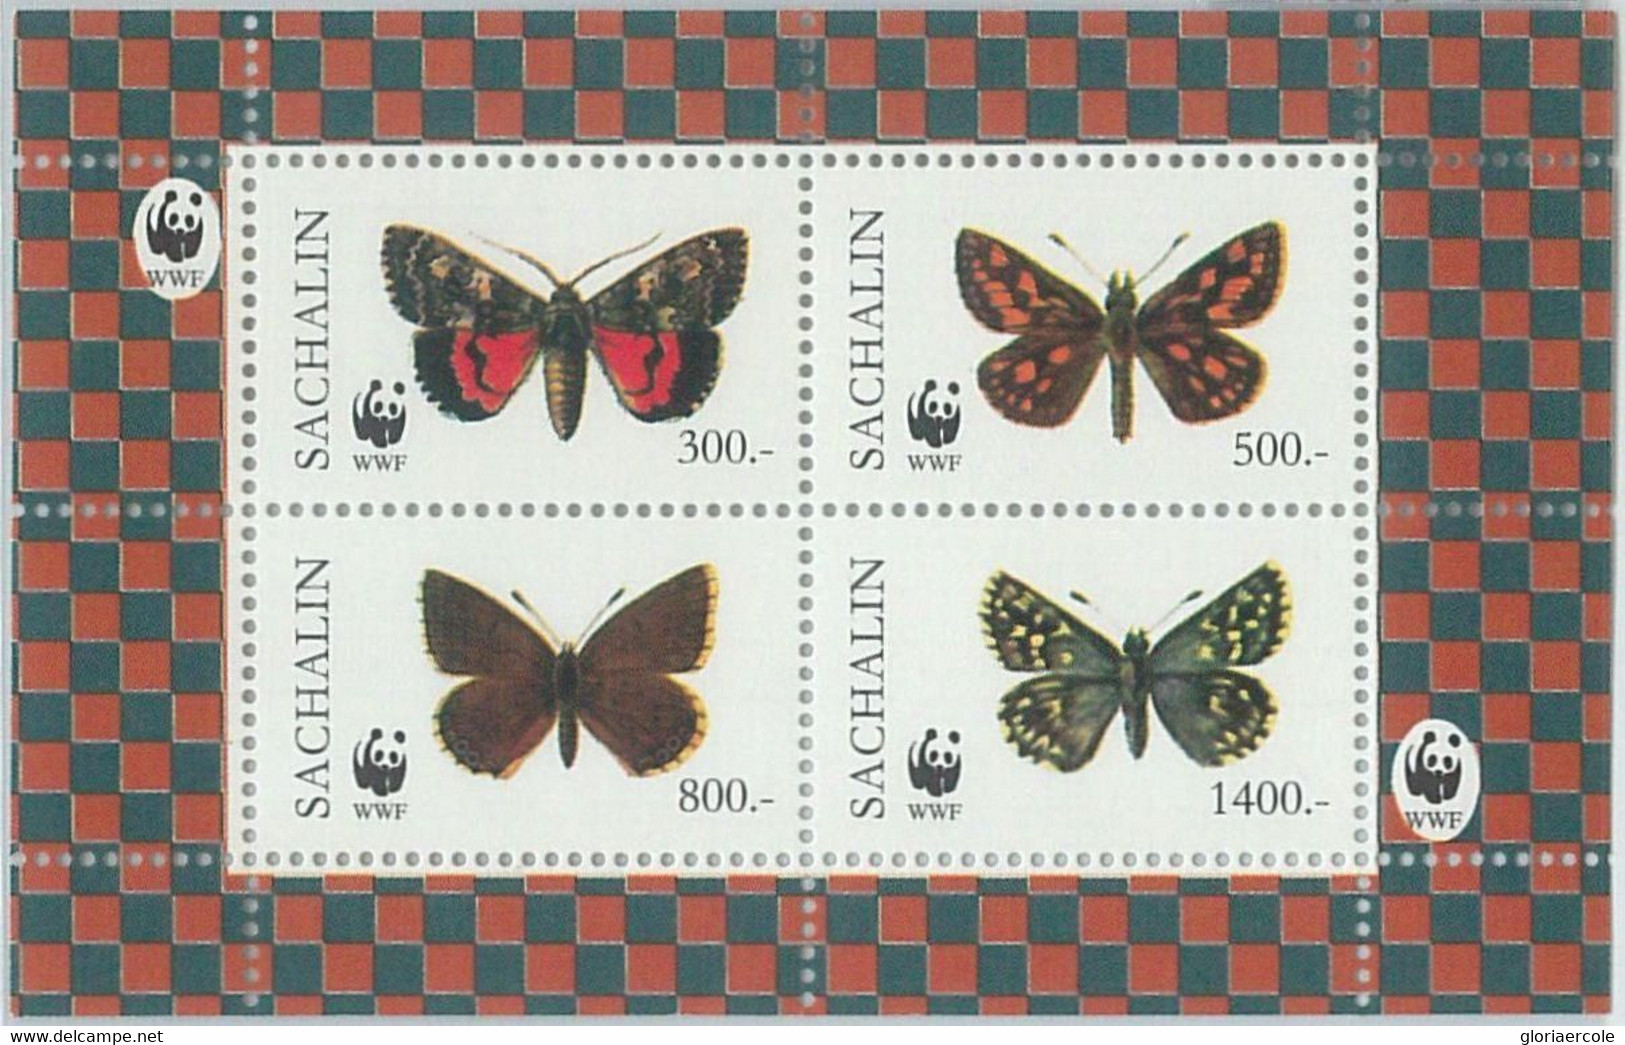 M2003 - RUSSIAN STATE, SHEET: WWF, Butterflies, Insects  R04.22 - Used Stamps